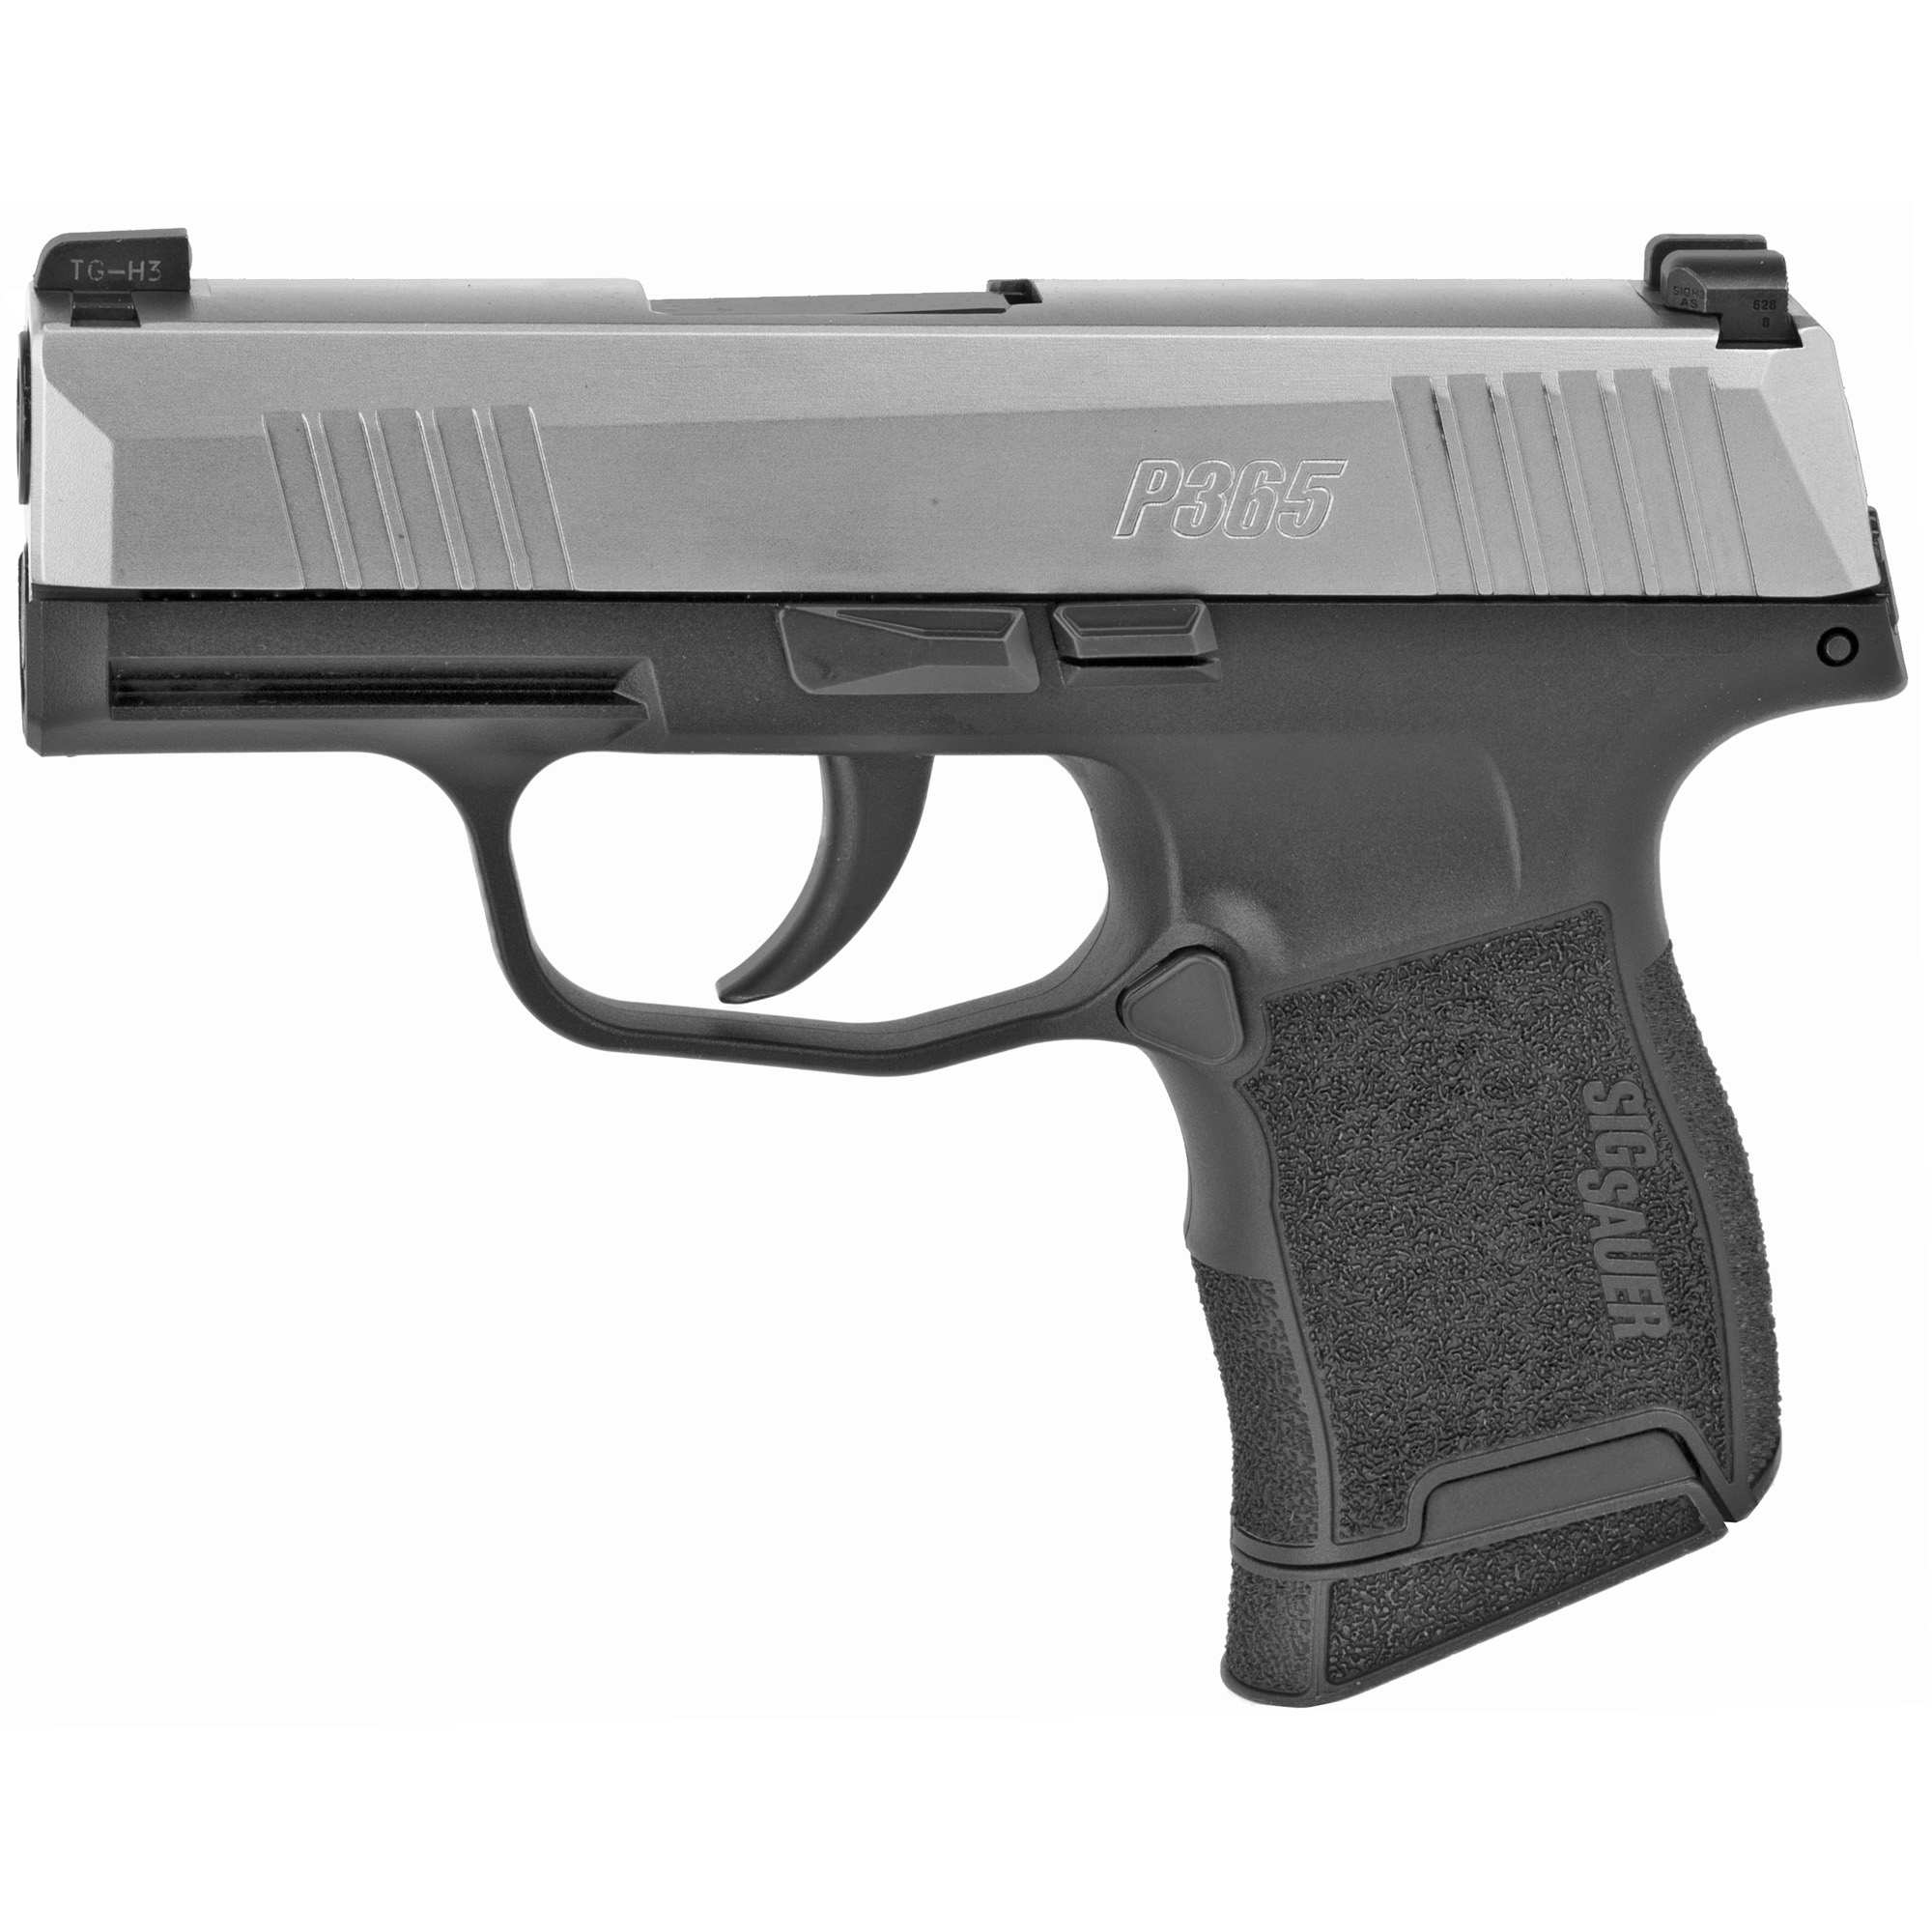 Sig Sauer, P365, Striker Fired, Semi-automatic, Polymer Frame Pistol, Sub-Compact, 9MM, 3.1" Barrel, Stainless Slide, Black Frame, XRAY3 Day/Night Sights, 2 Magazines